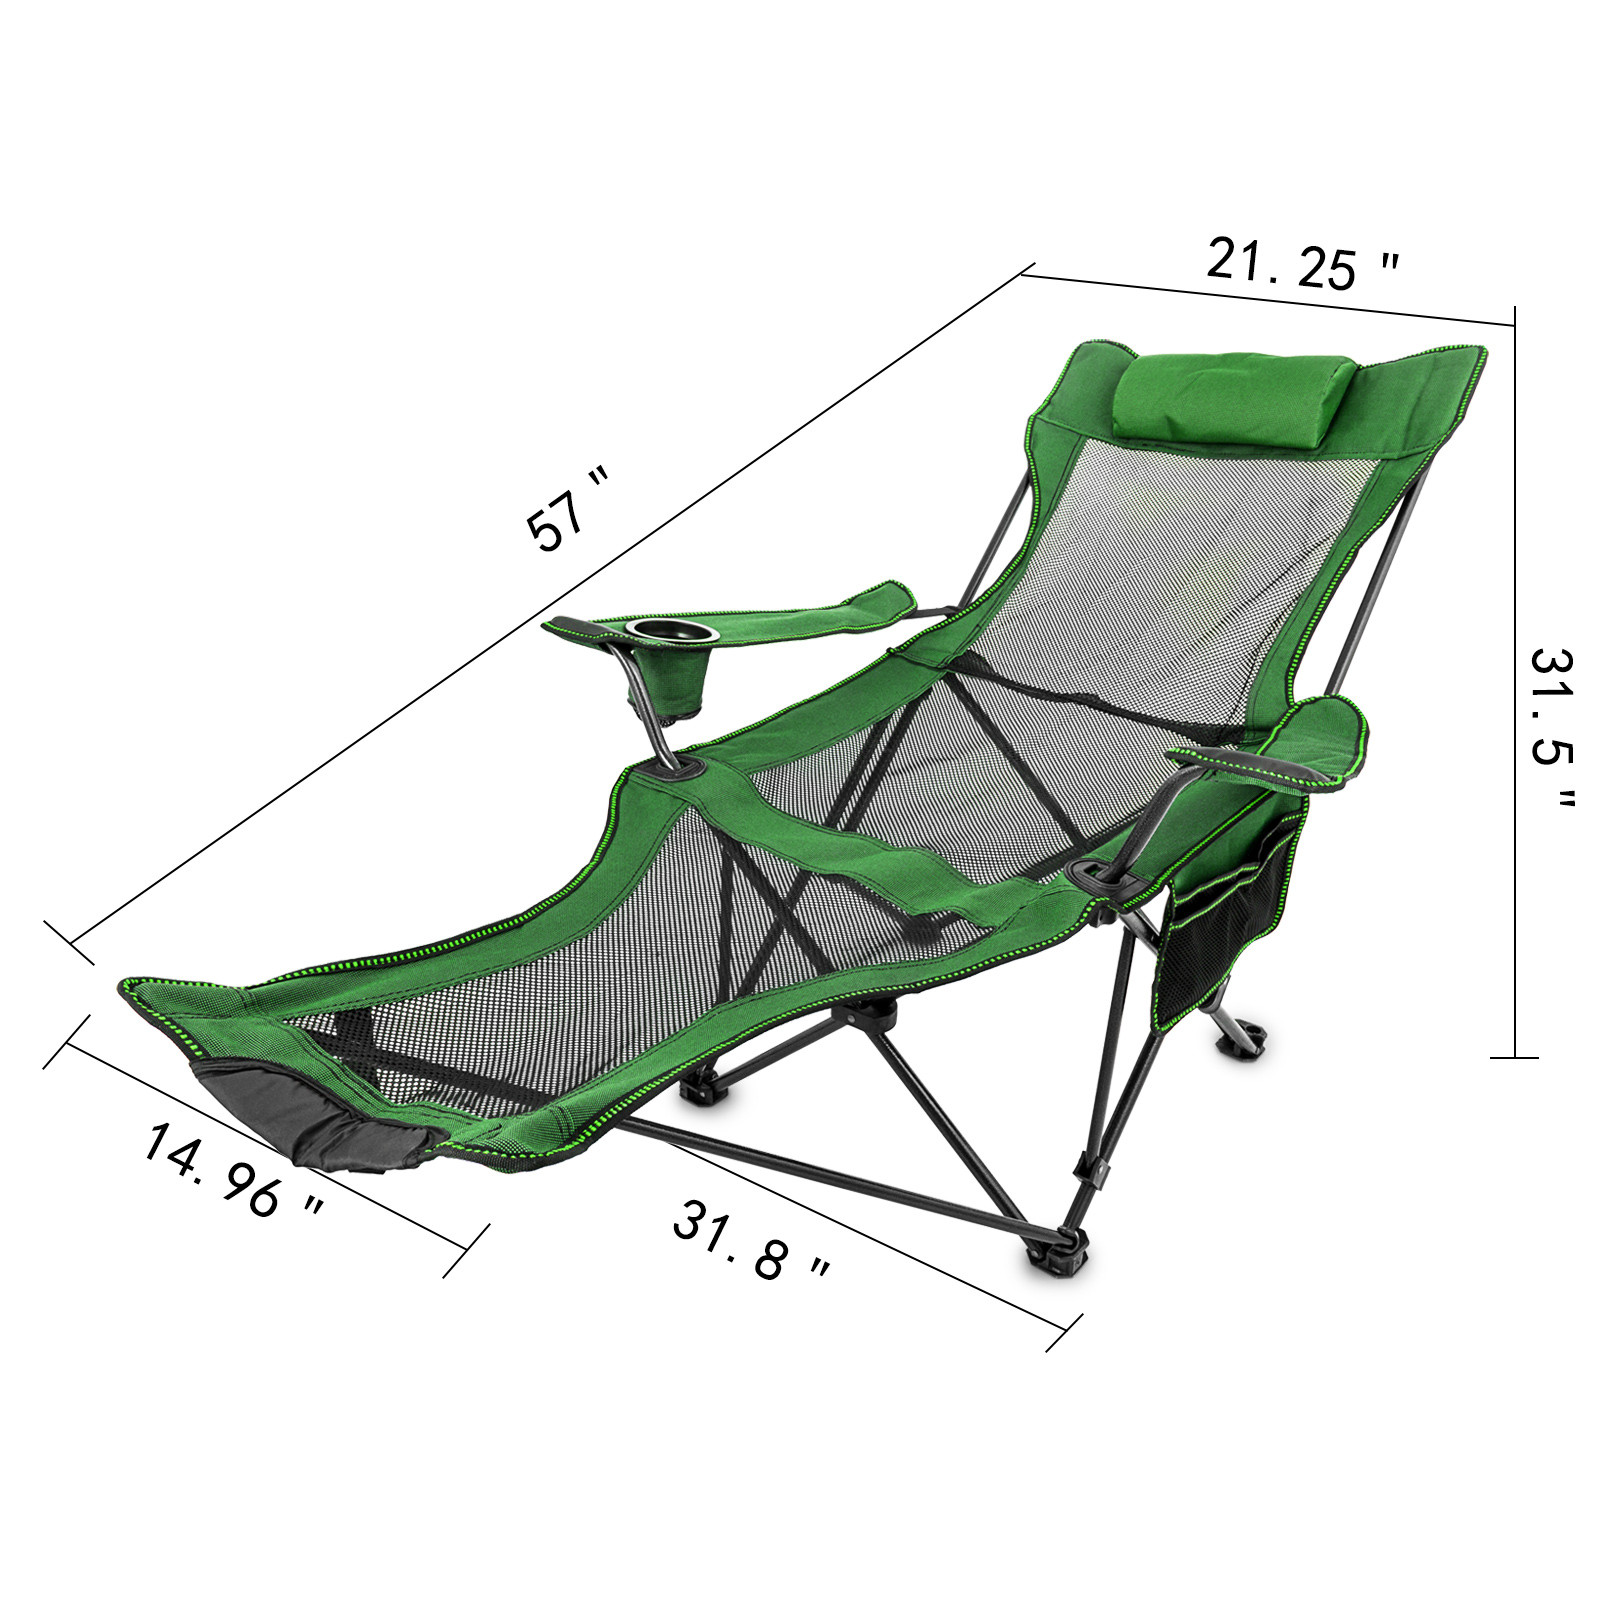 Green/Blue/Gray Reclining Folding Camp Chair W/ Footrest Lounge Gray Chaise 